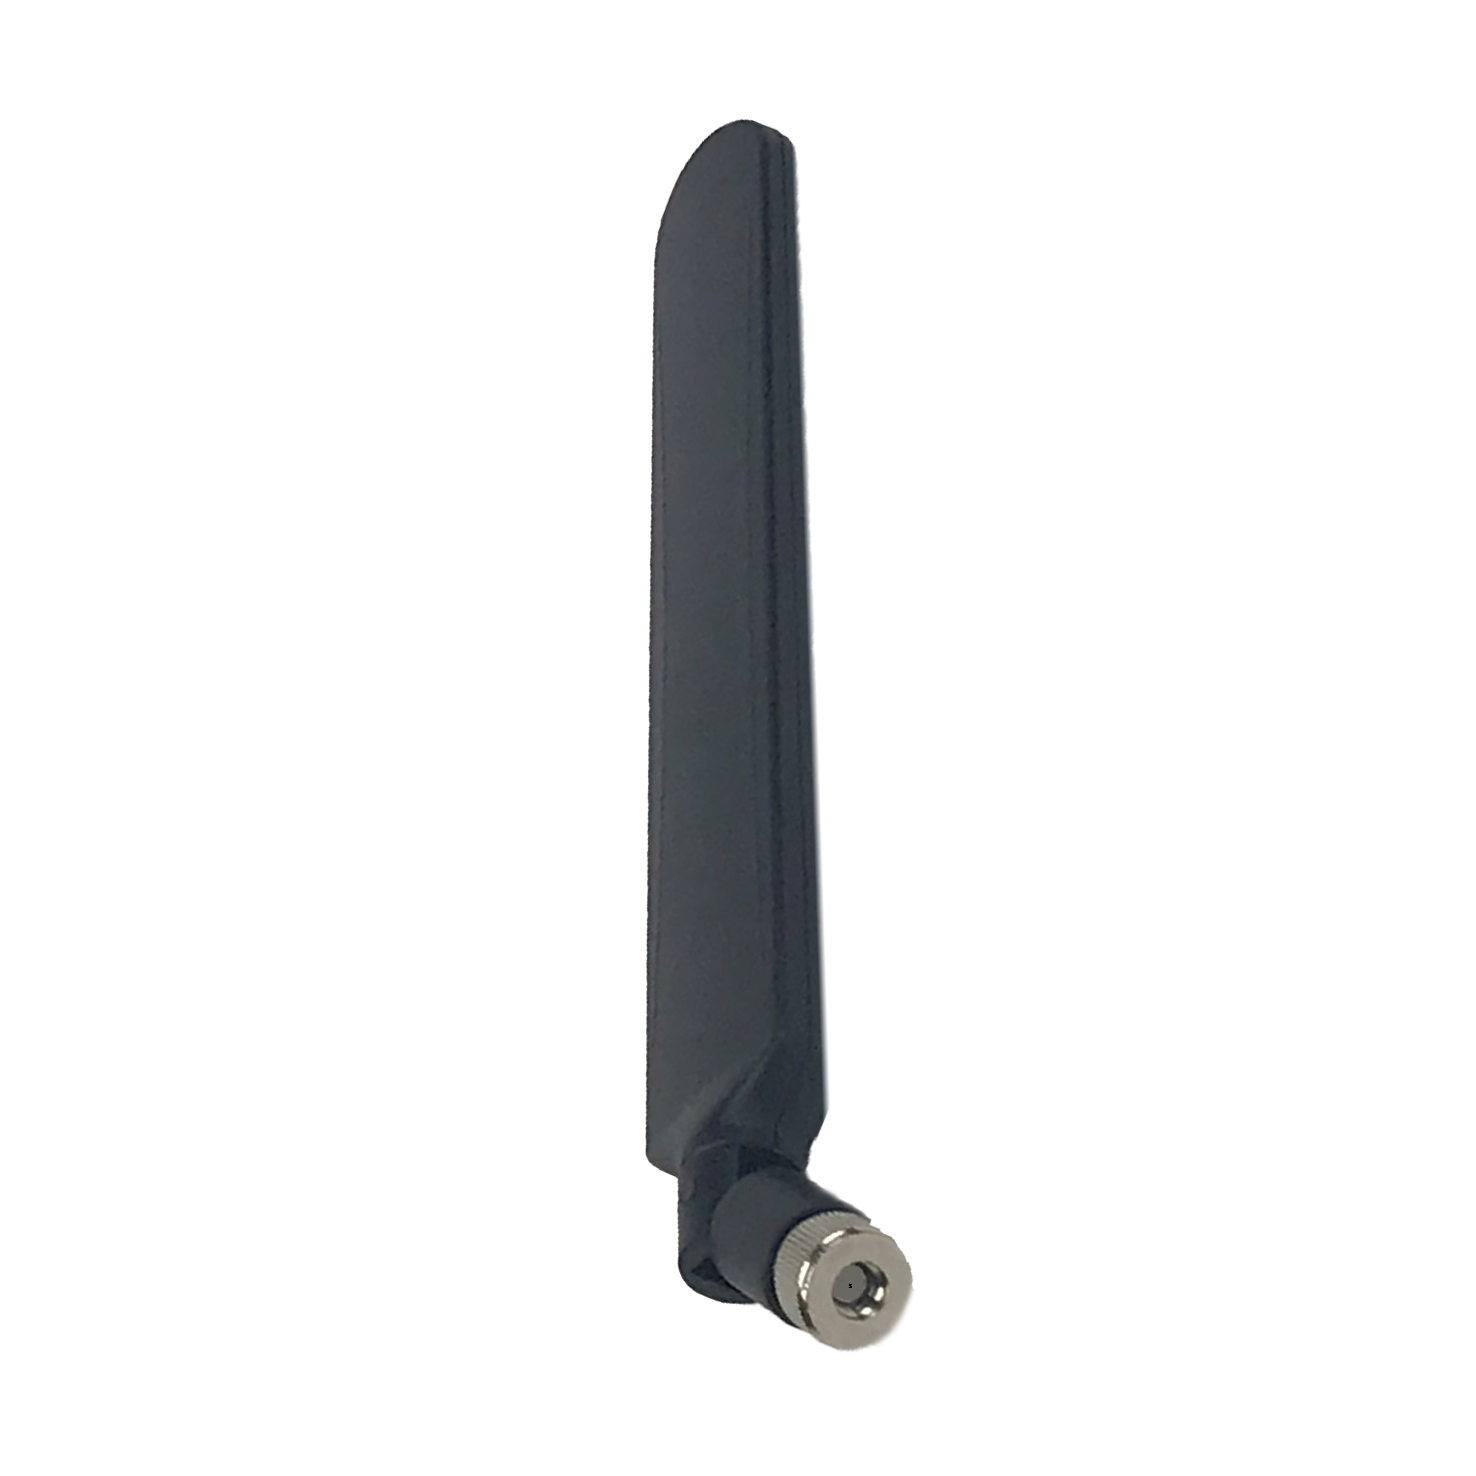 3G/4G/LTE Antenna for Cellular IoT. High Performance, High Efficiency for AT&T, Verizon, Sprint Carrier Certification. | RDA698/2700-1-RSM